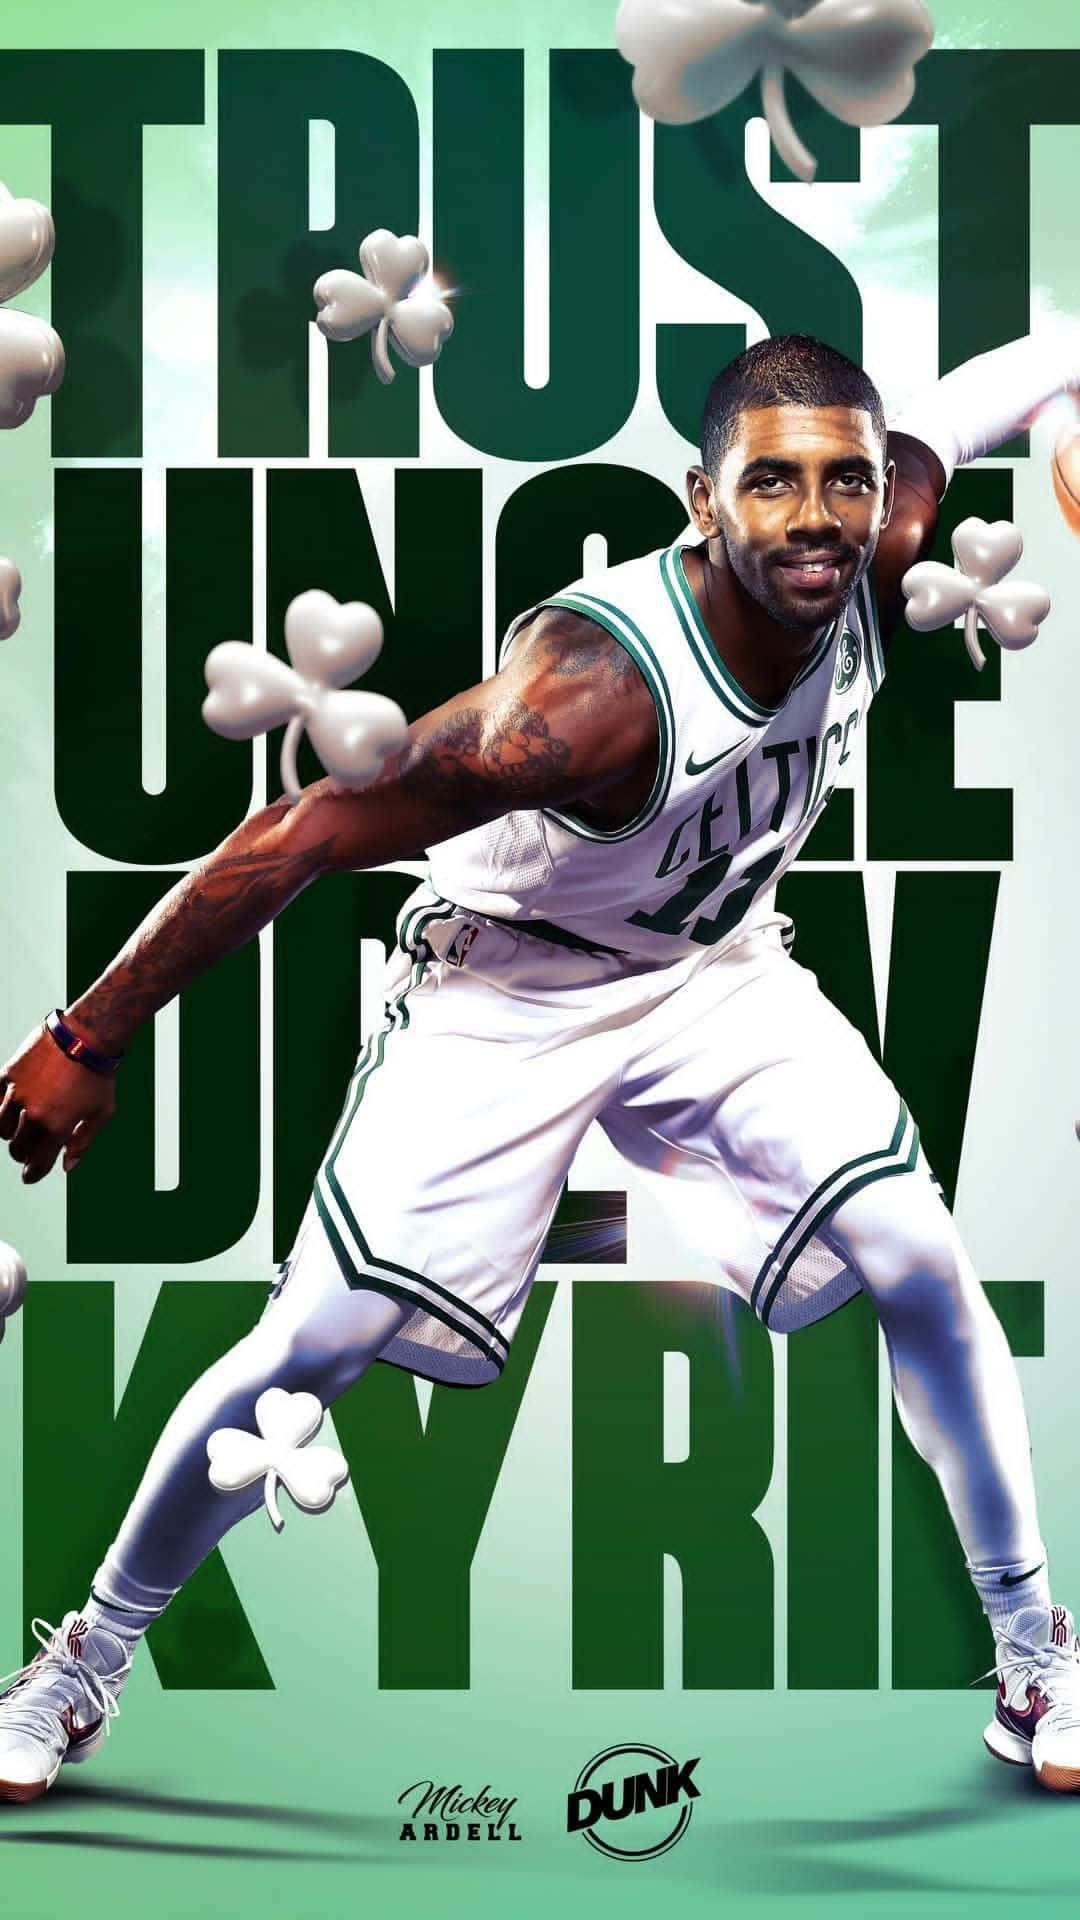 Kyrie Irving making a cool move on the court. Wallpaper